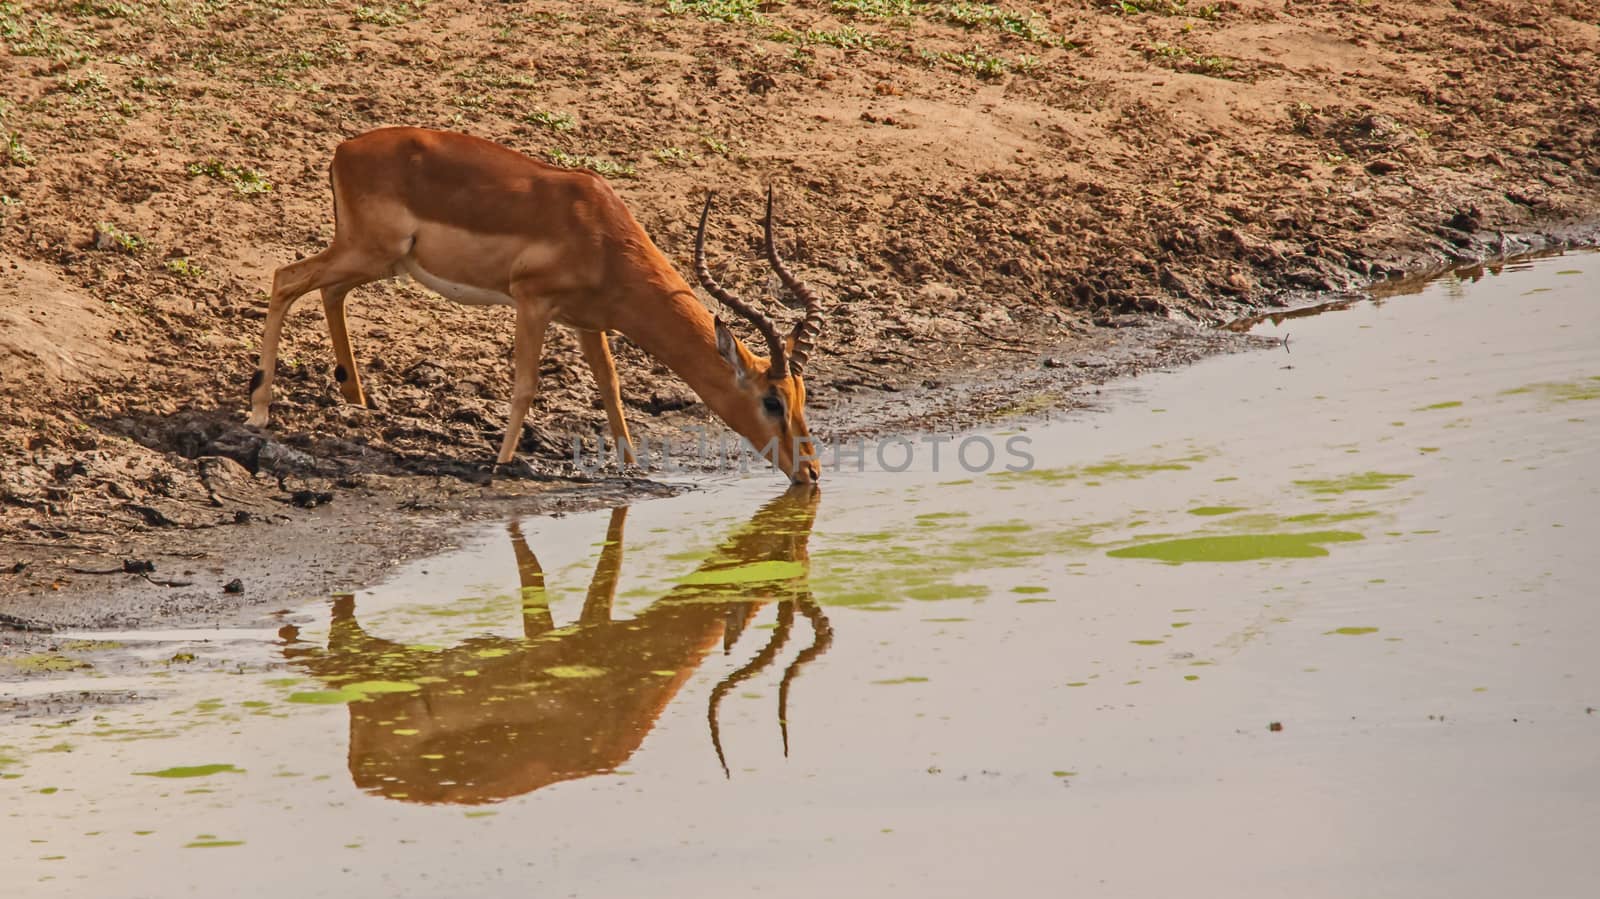 An Impala ram (Aepyceros melampus) drinking water in Kruger National Park, South Africa.